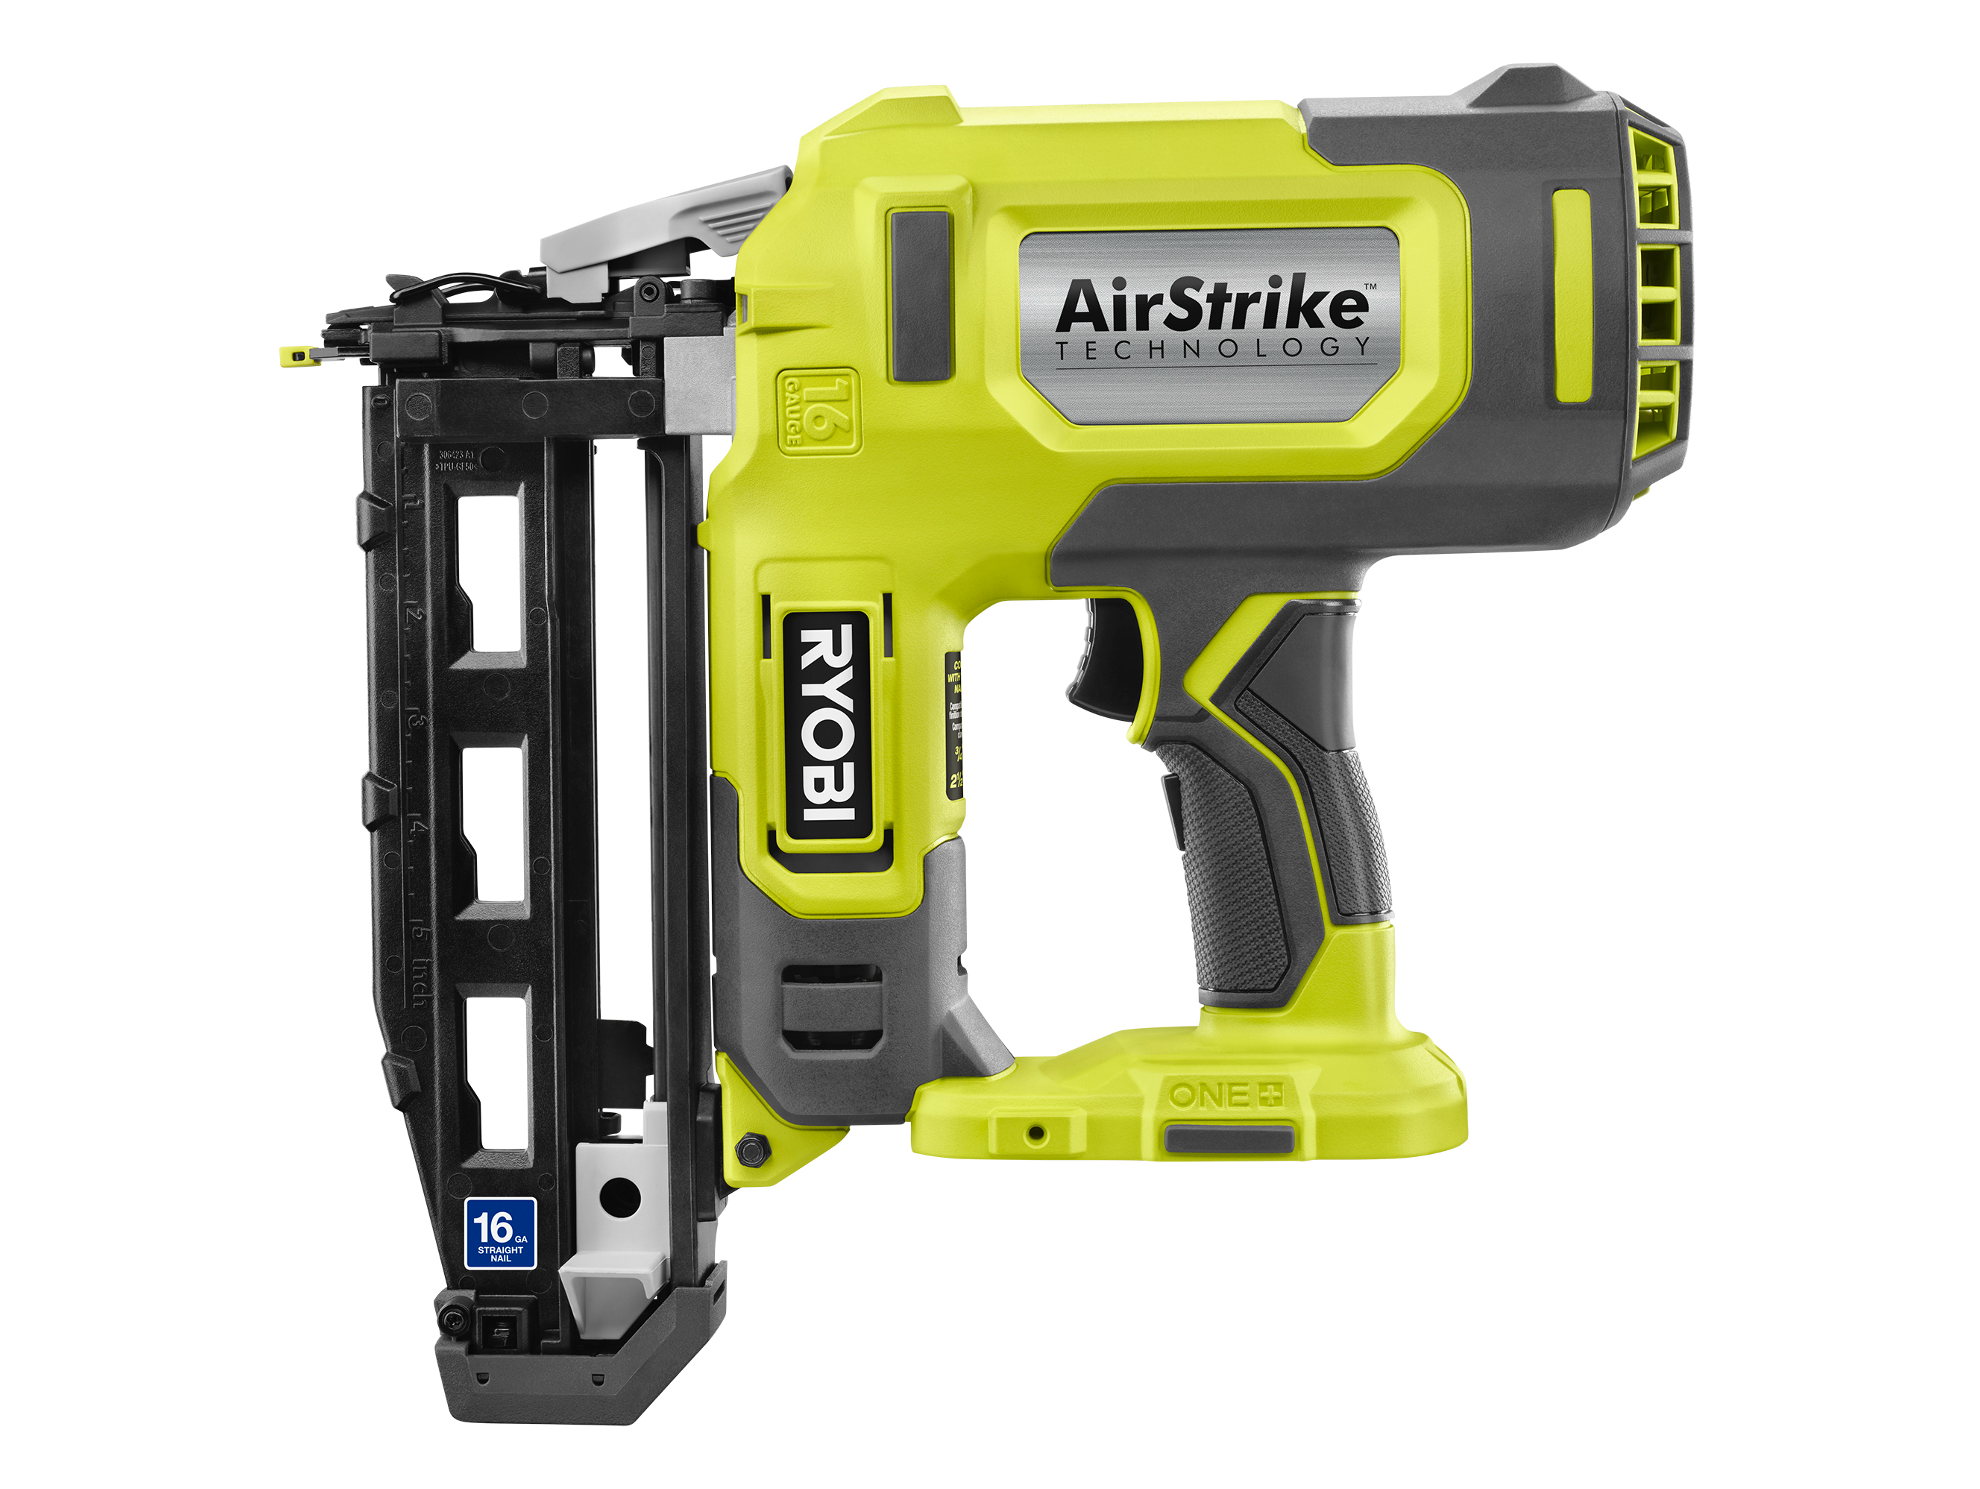 Product Features Image for 18V ONE+ AIRSTRIKE 16GA FINISH NAILER KIT (BATTERY AND CHARGER).